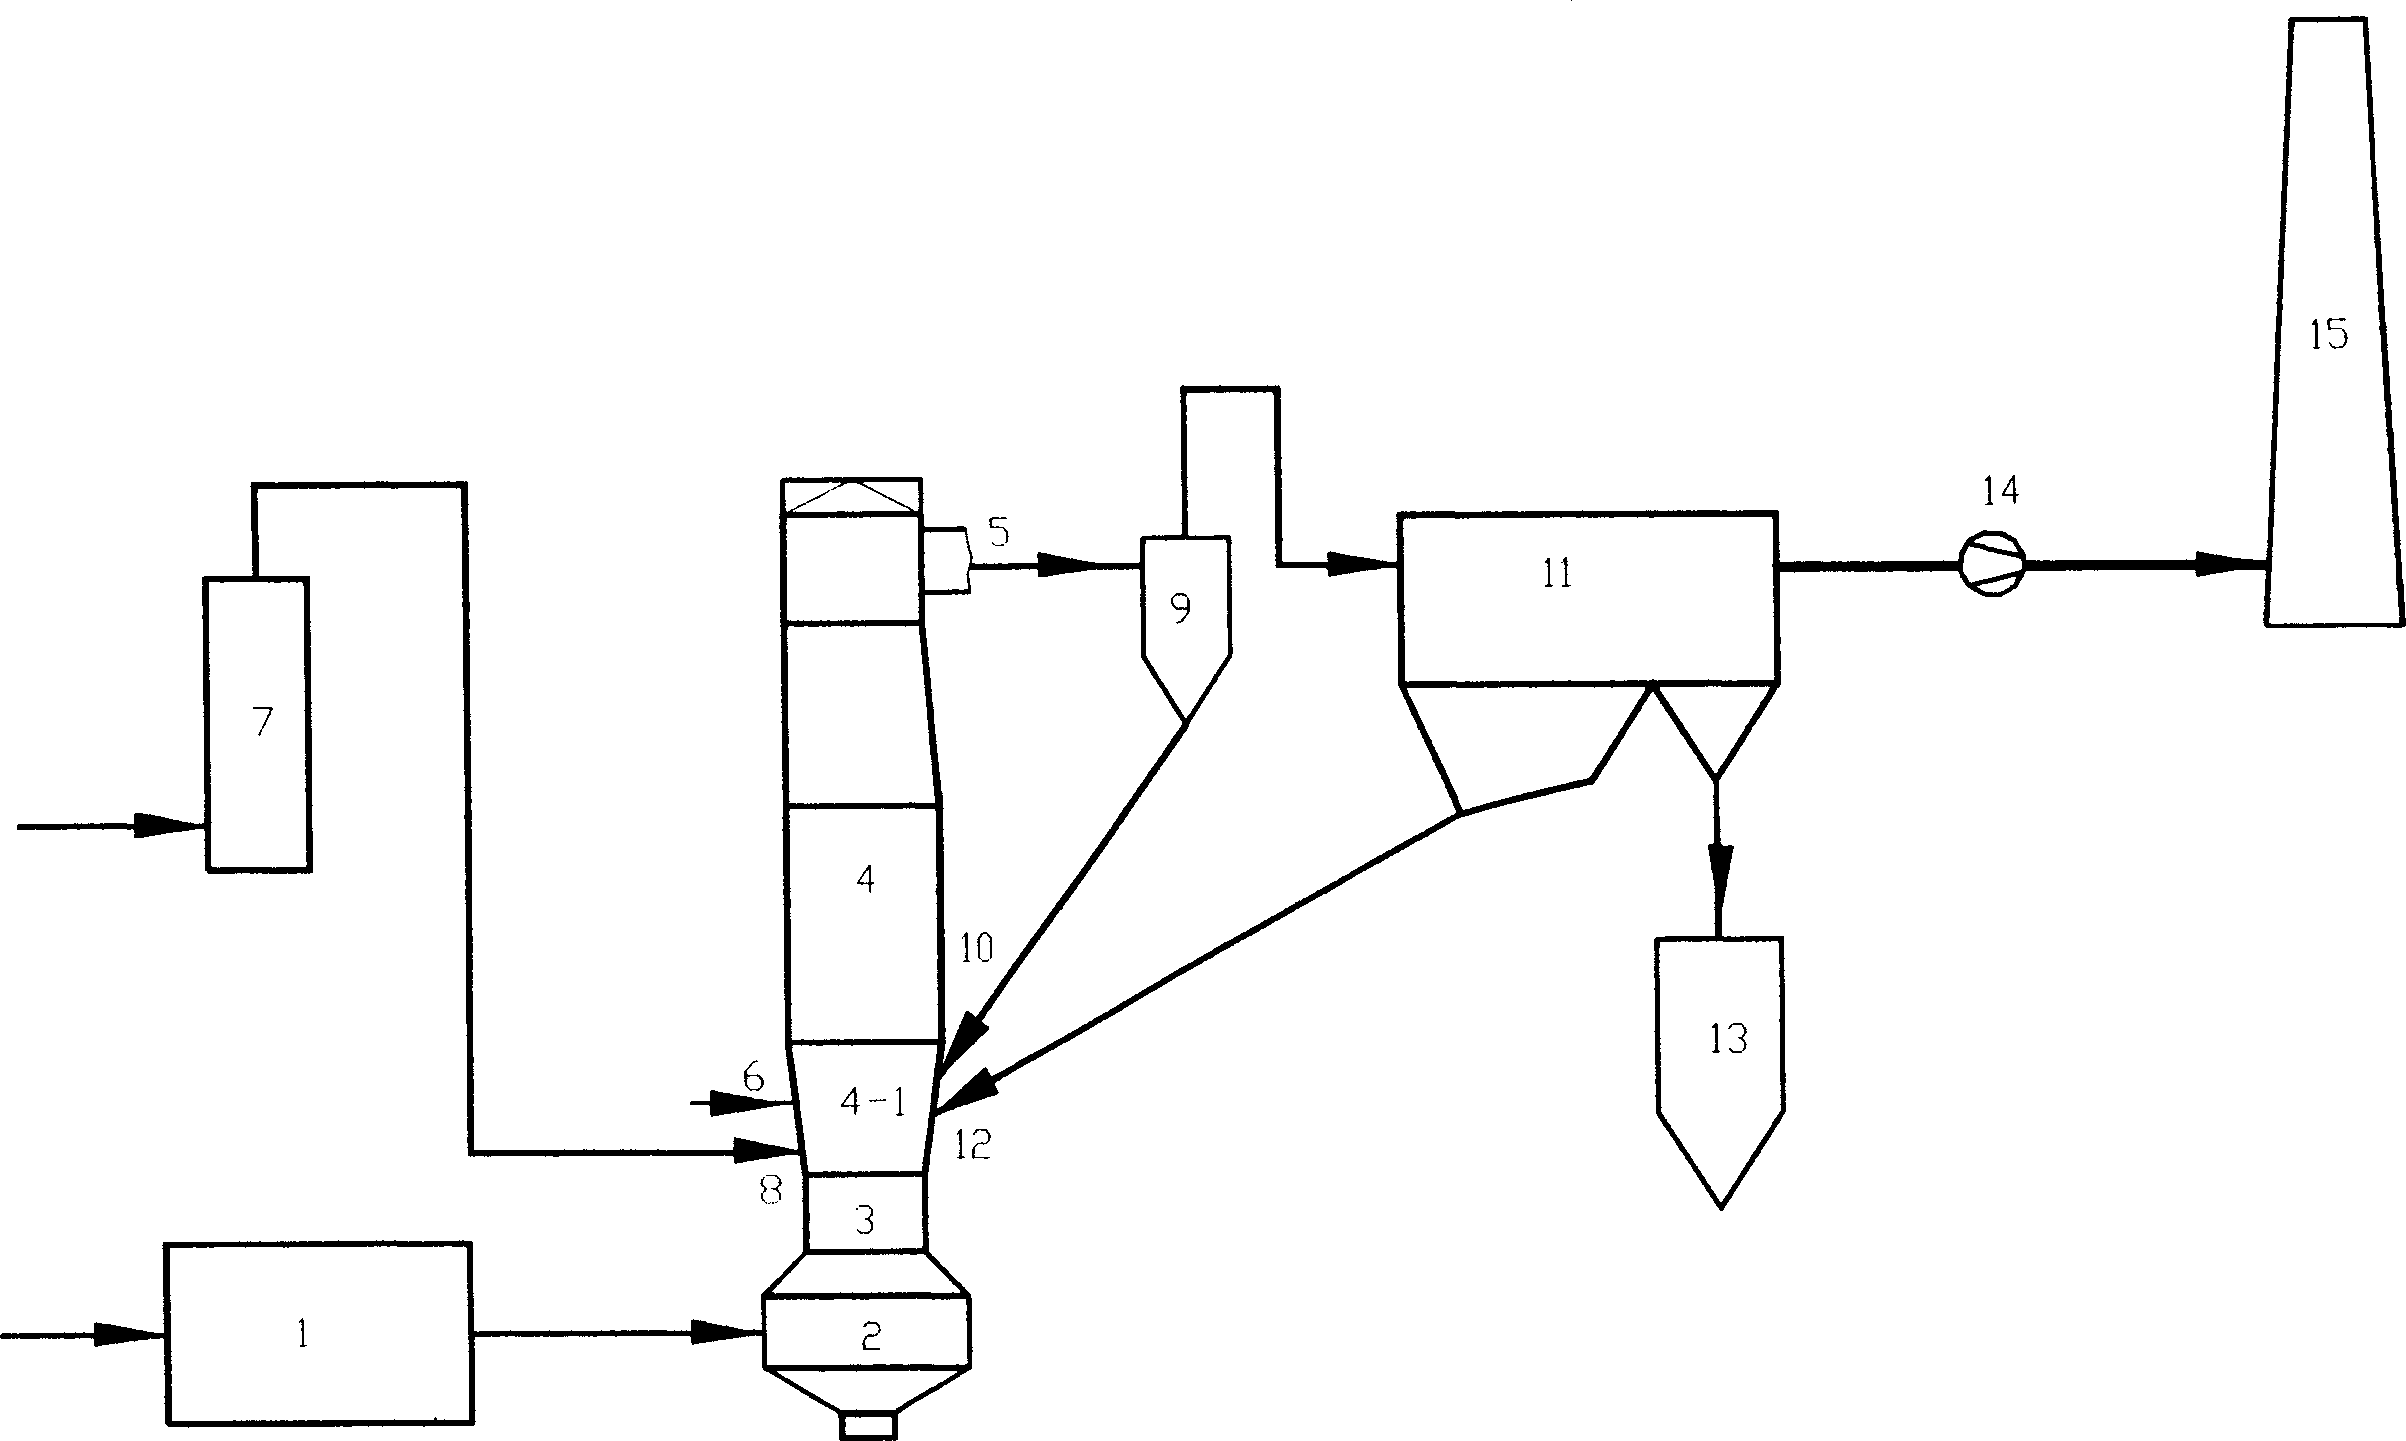 Smoke desulfurizing process by circulation fluid state dry method of layered feed back